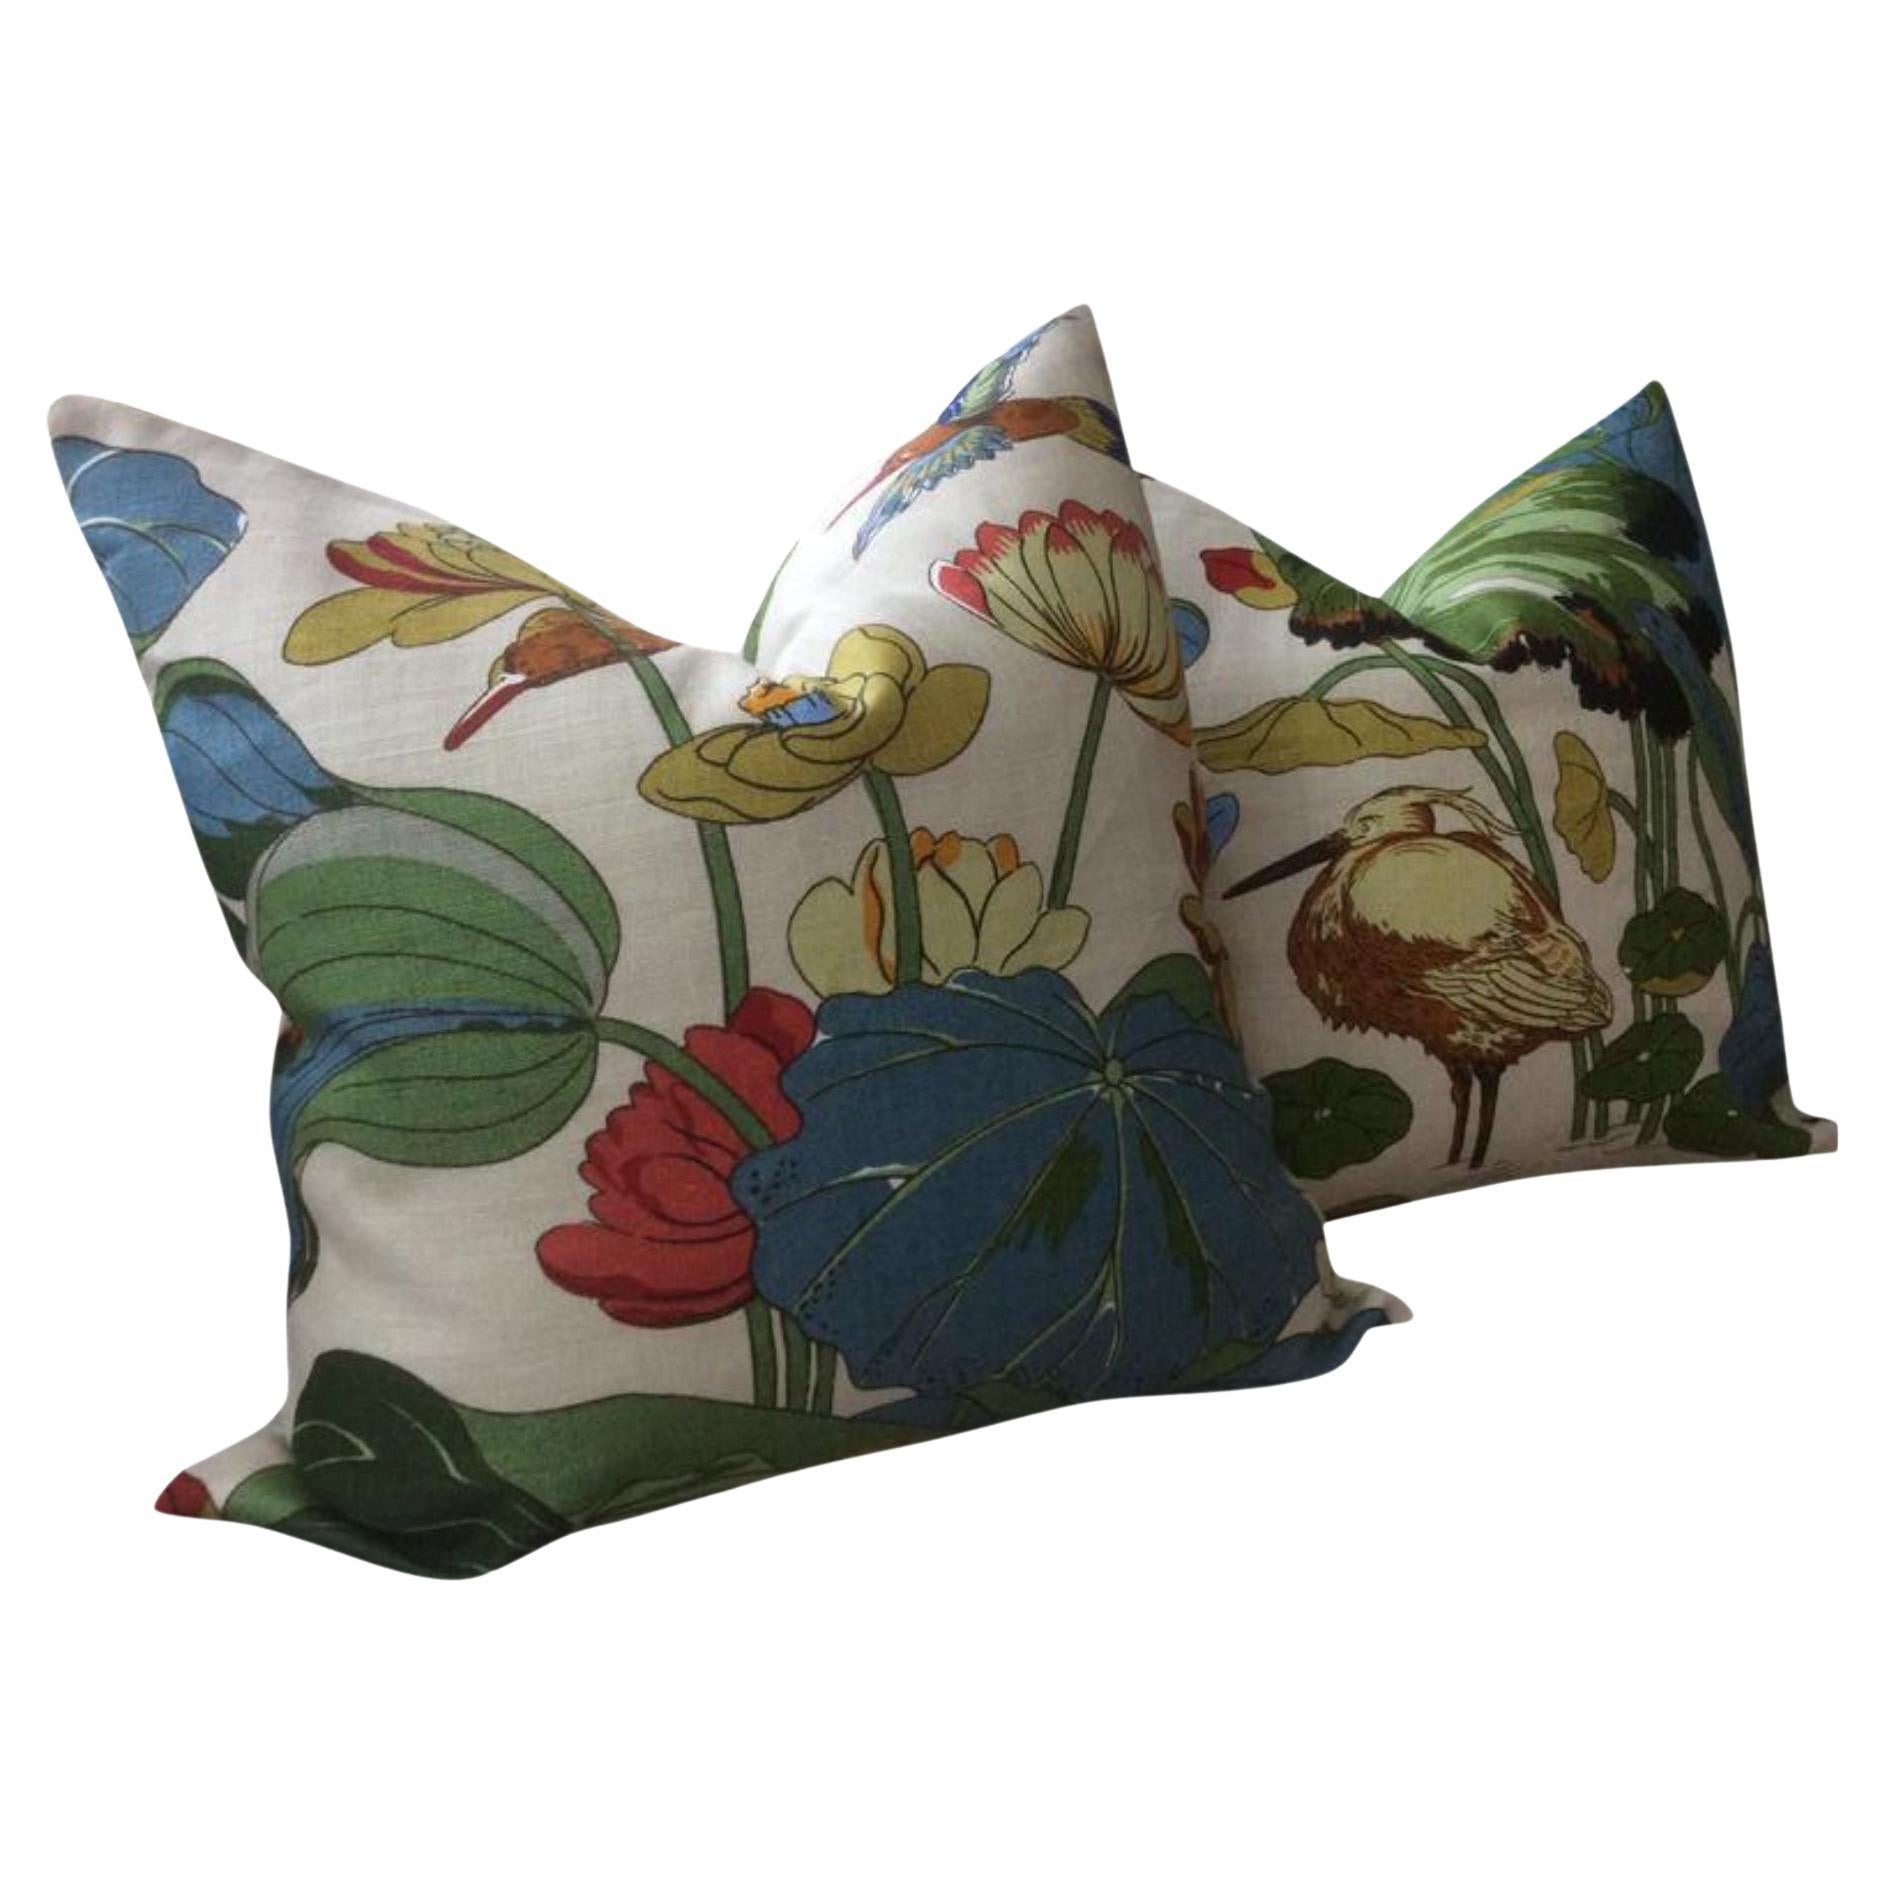 Contemporary g.p. And J Baker “Nympheus” Pillows in Stone - a Pair